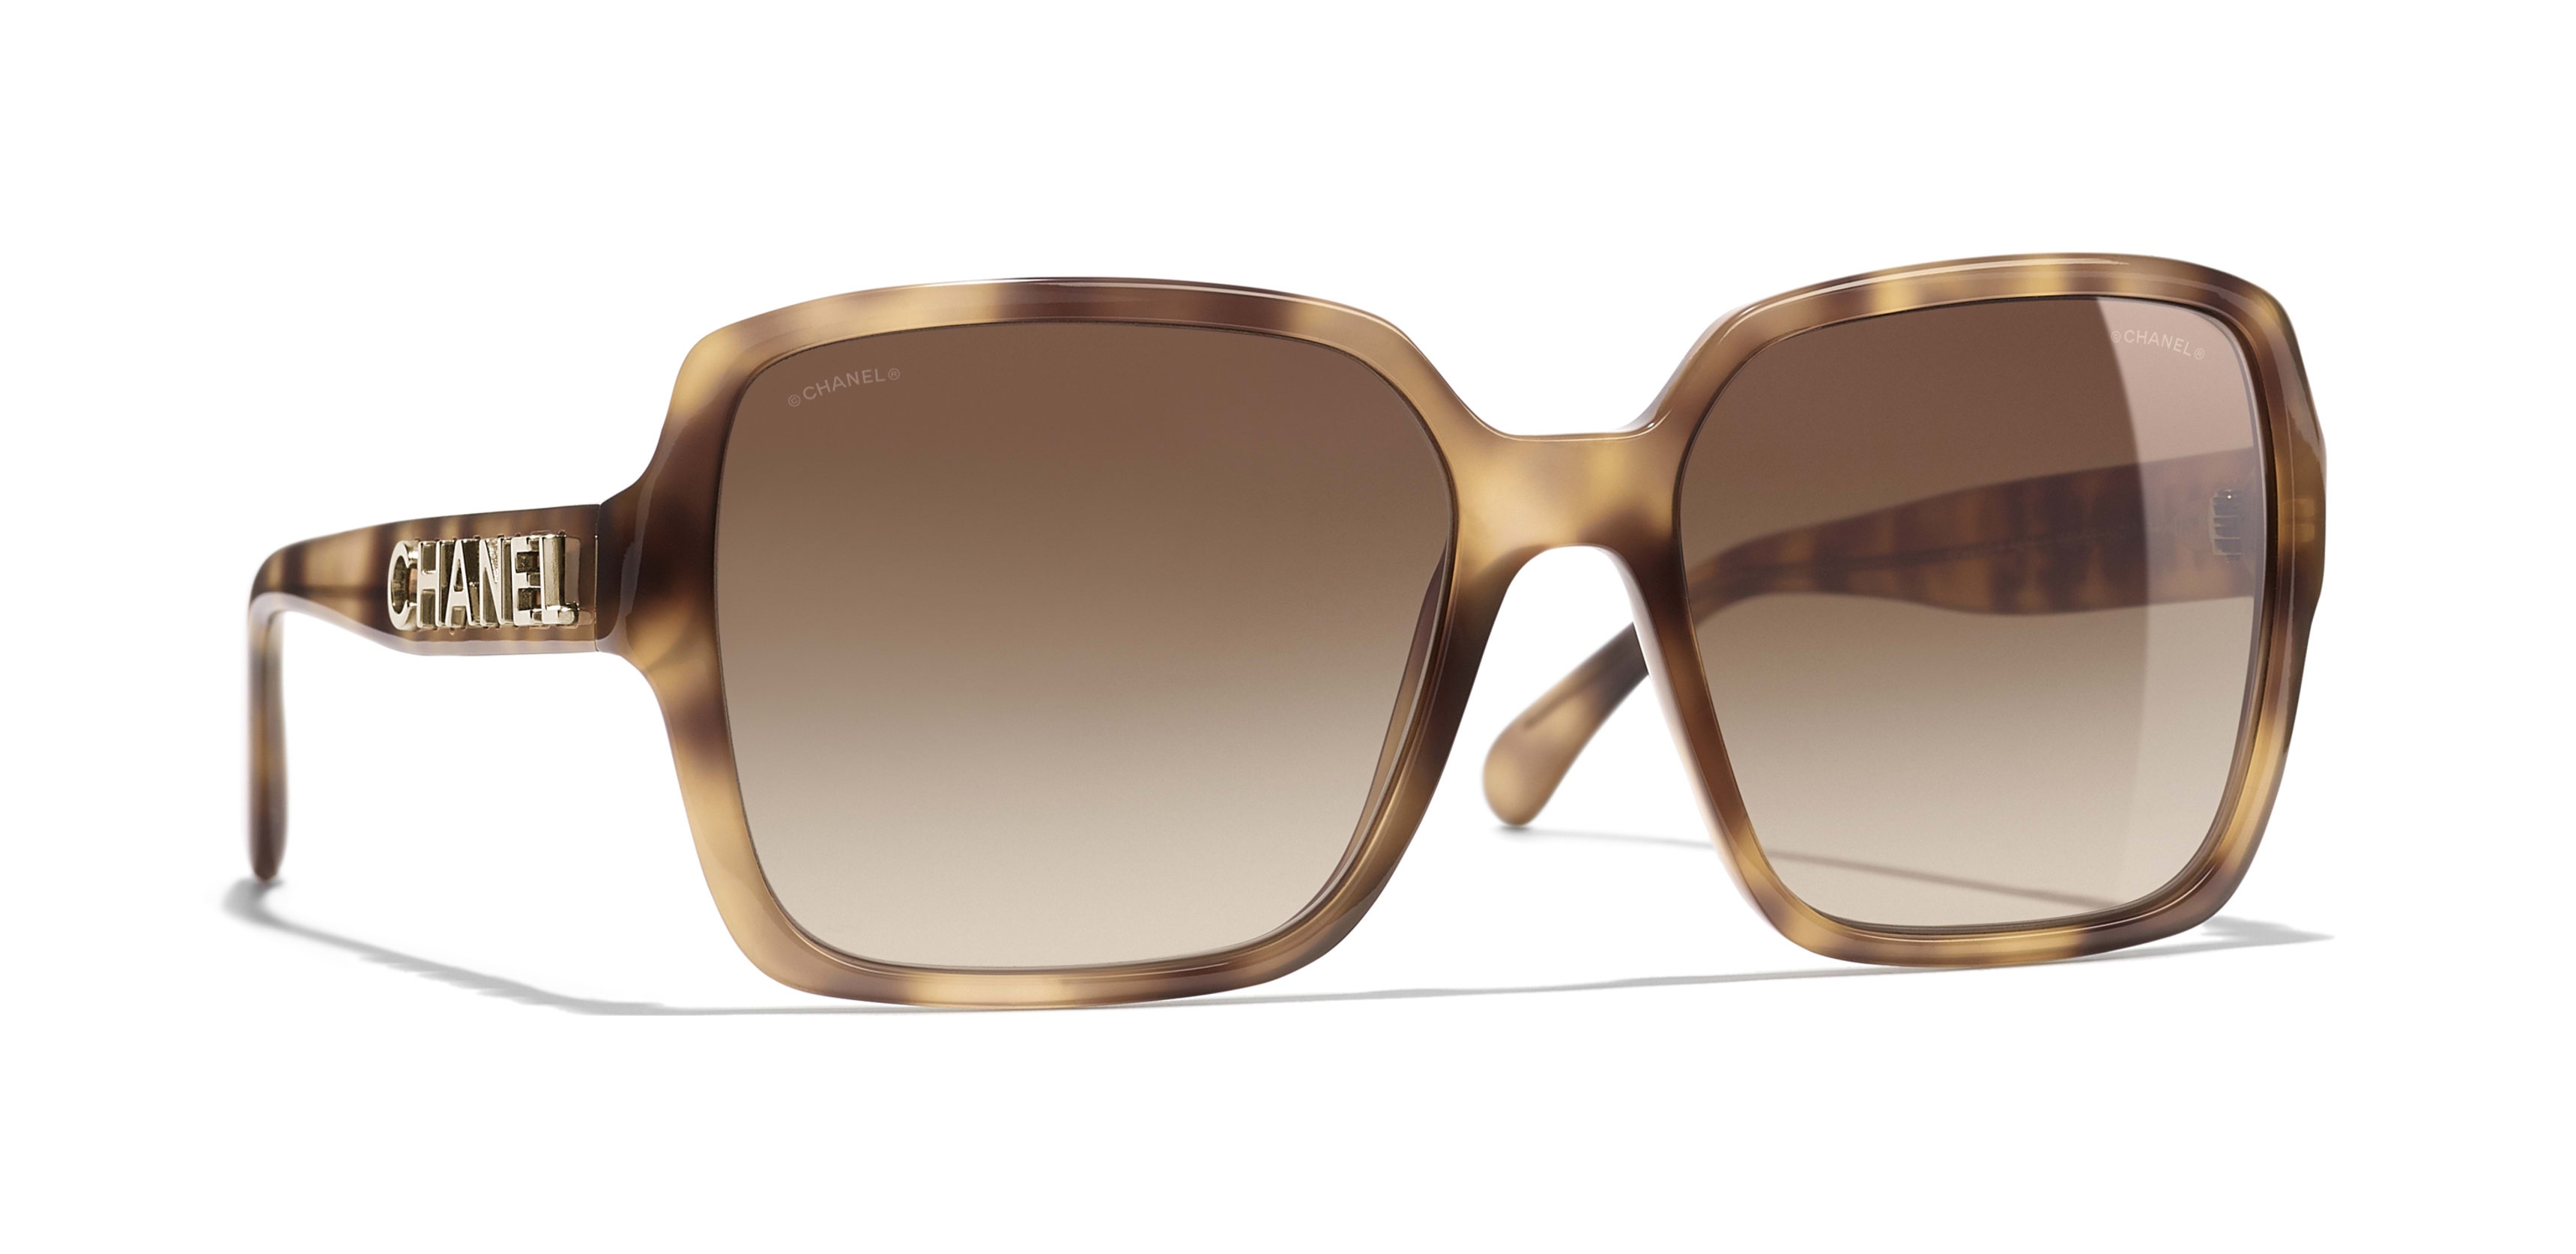 they're the @ChanelOfficial square sunglasses in brown//beige ref